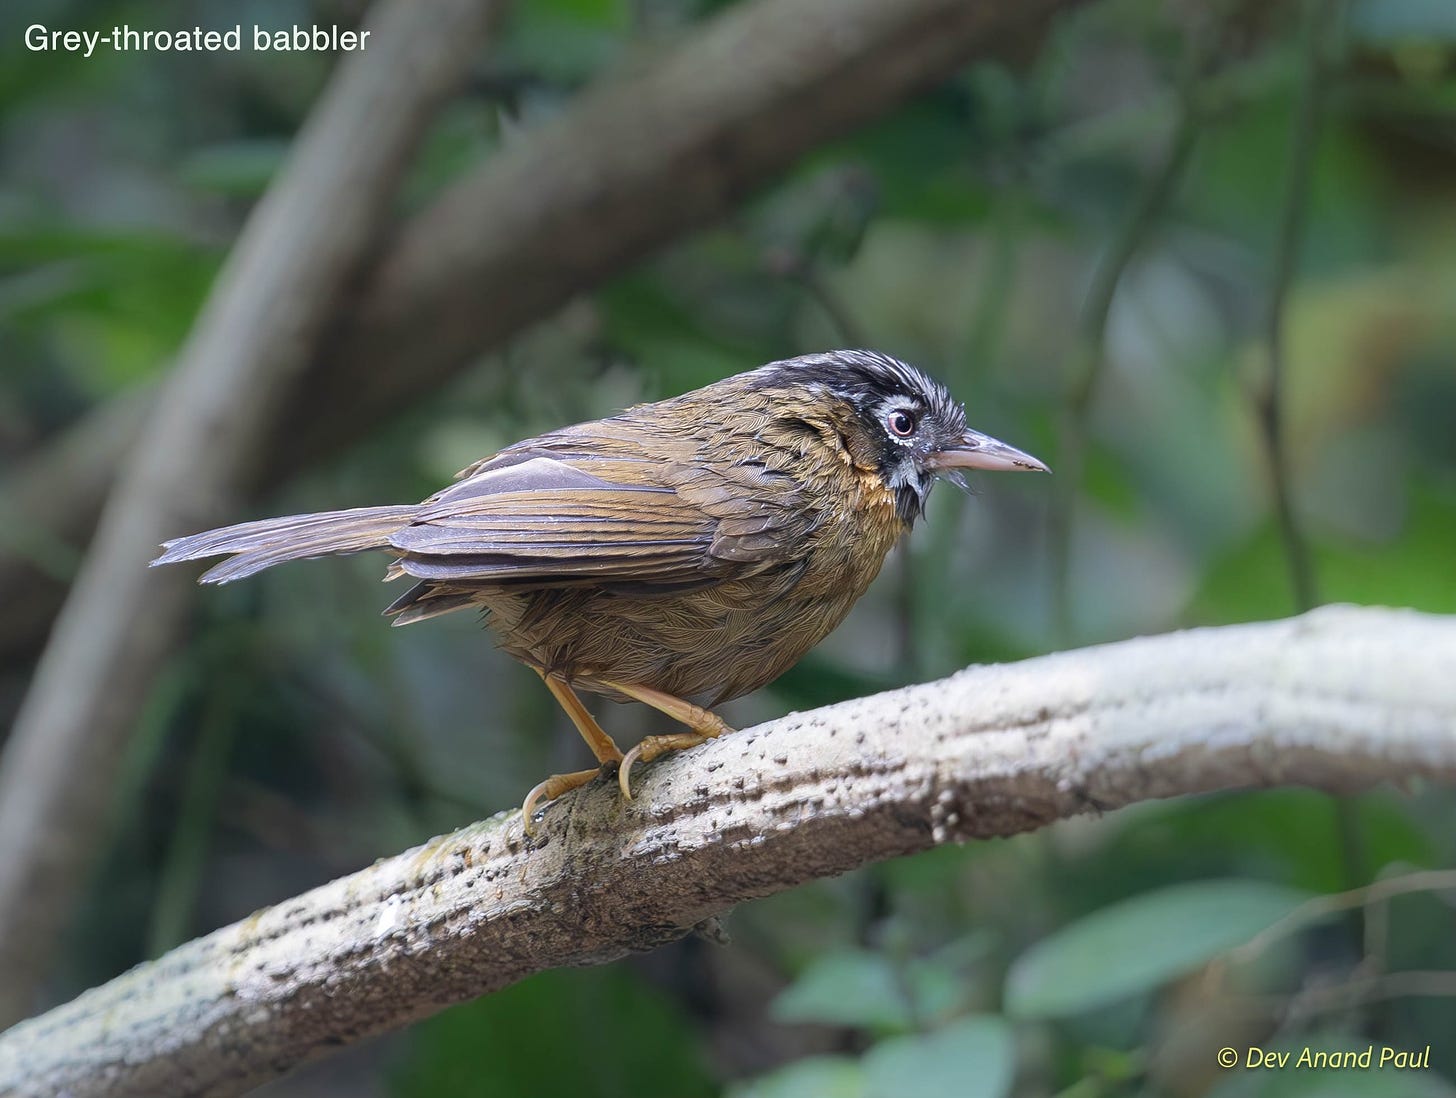 May be an image of bird and text that says 'Grey-throated babbler @AanPau © Dev Anand'